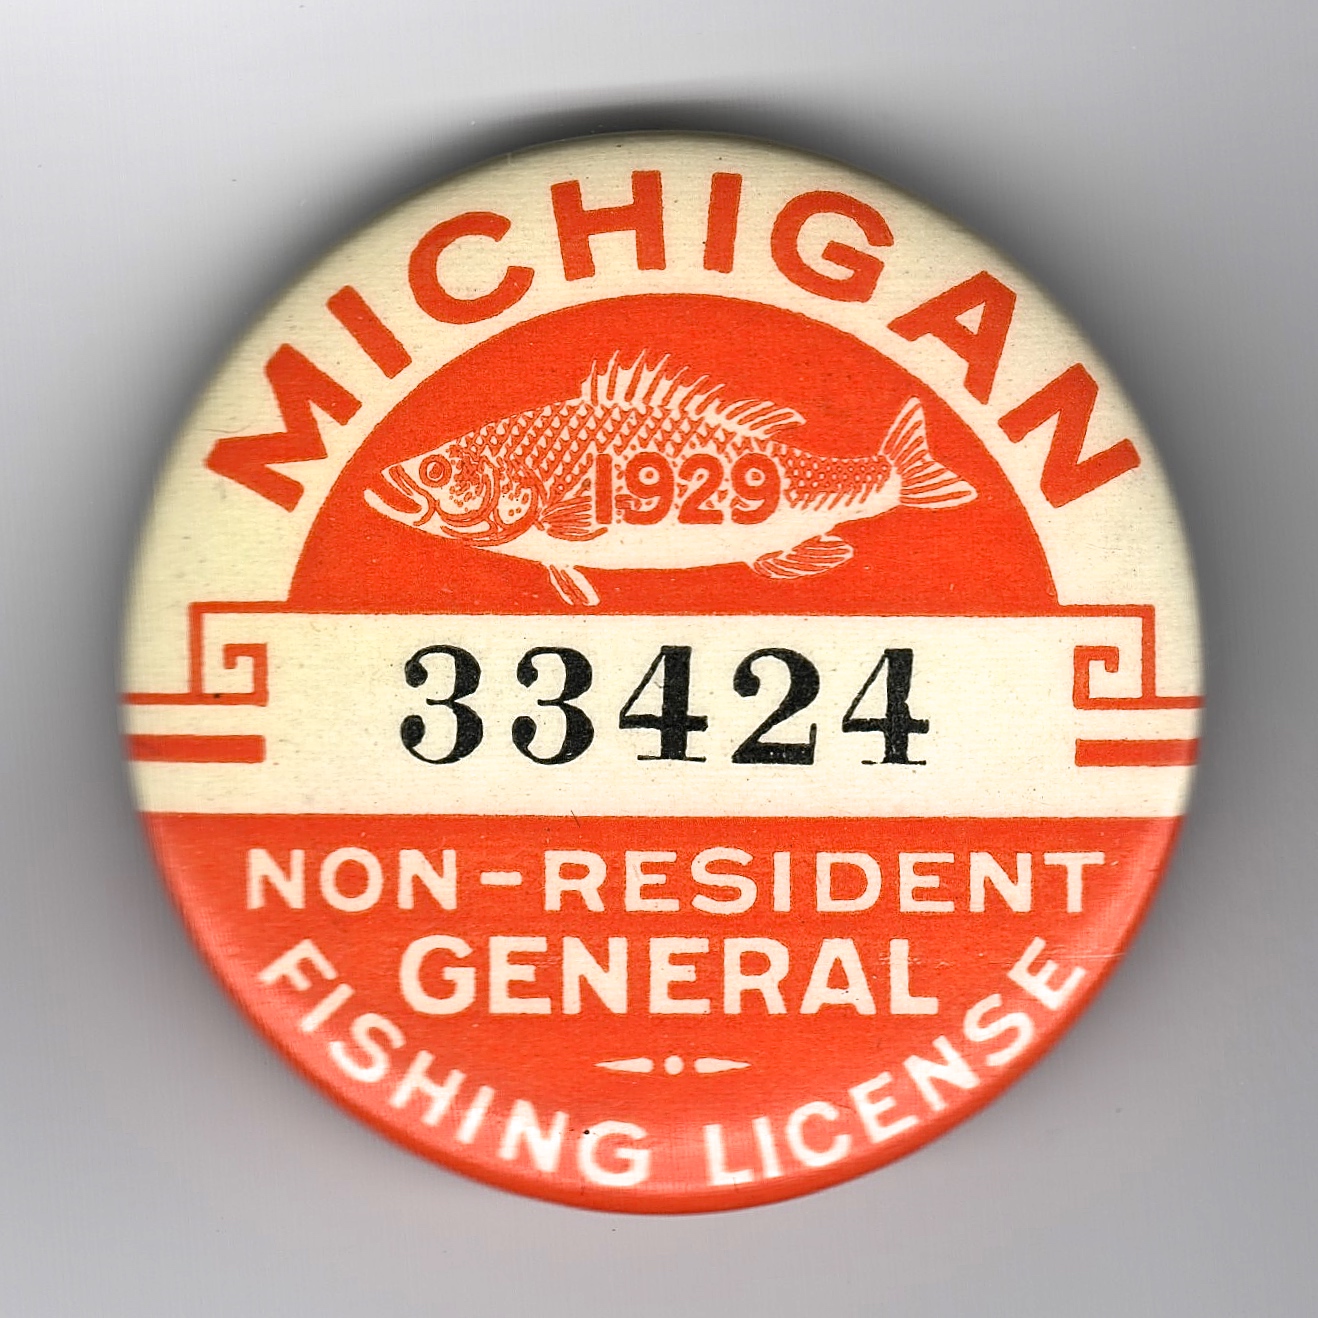 1929 MICHIGAN NON-RESIDENT SPECIAL FISHING LICENSE PIN BACK W